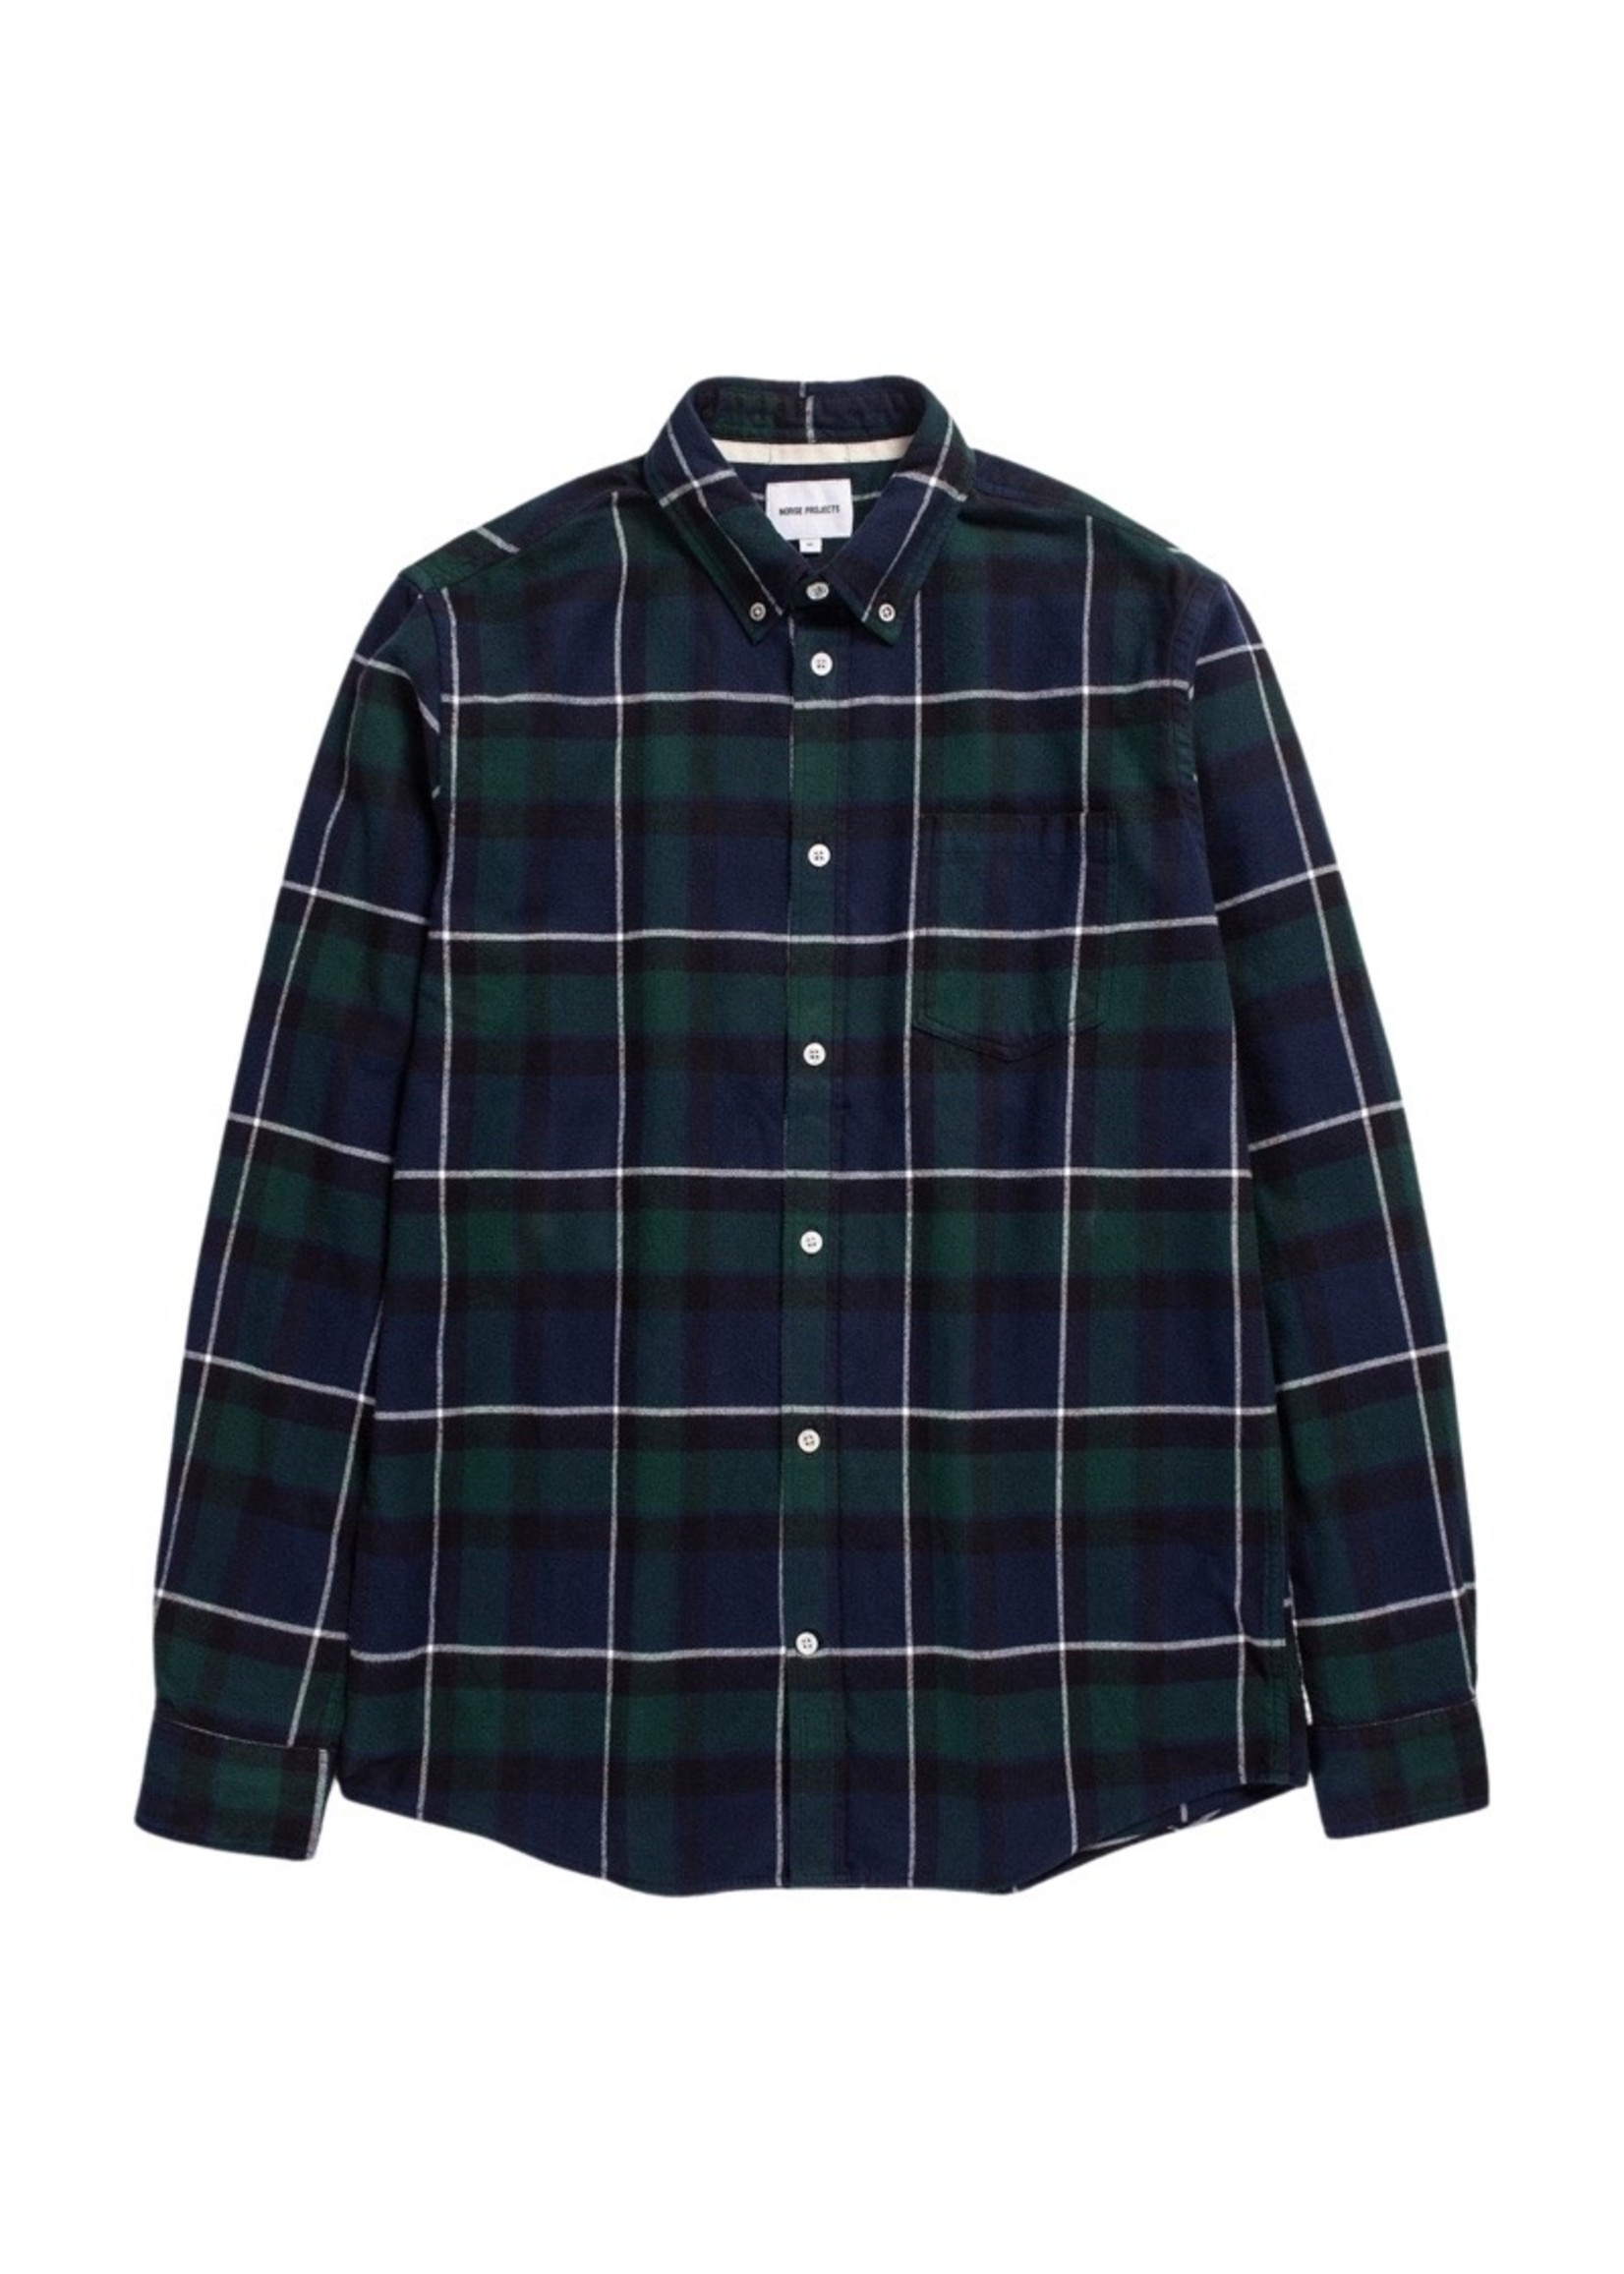 NORSE PROJECTS ANTON FLANNEL CHECK SHIRT